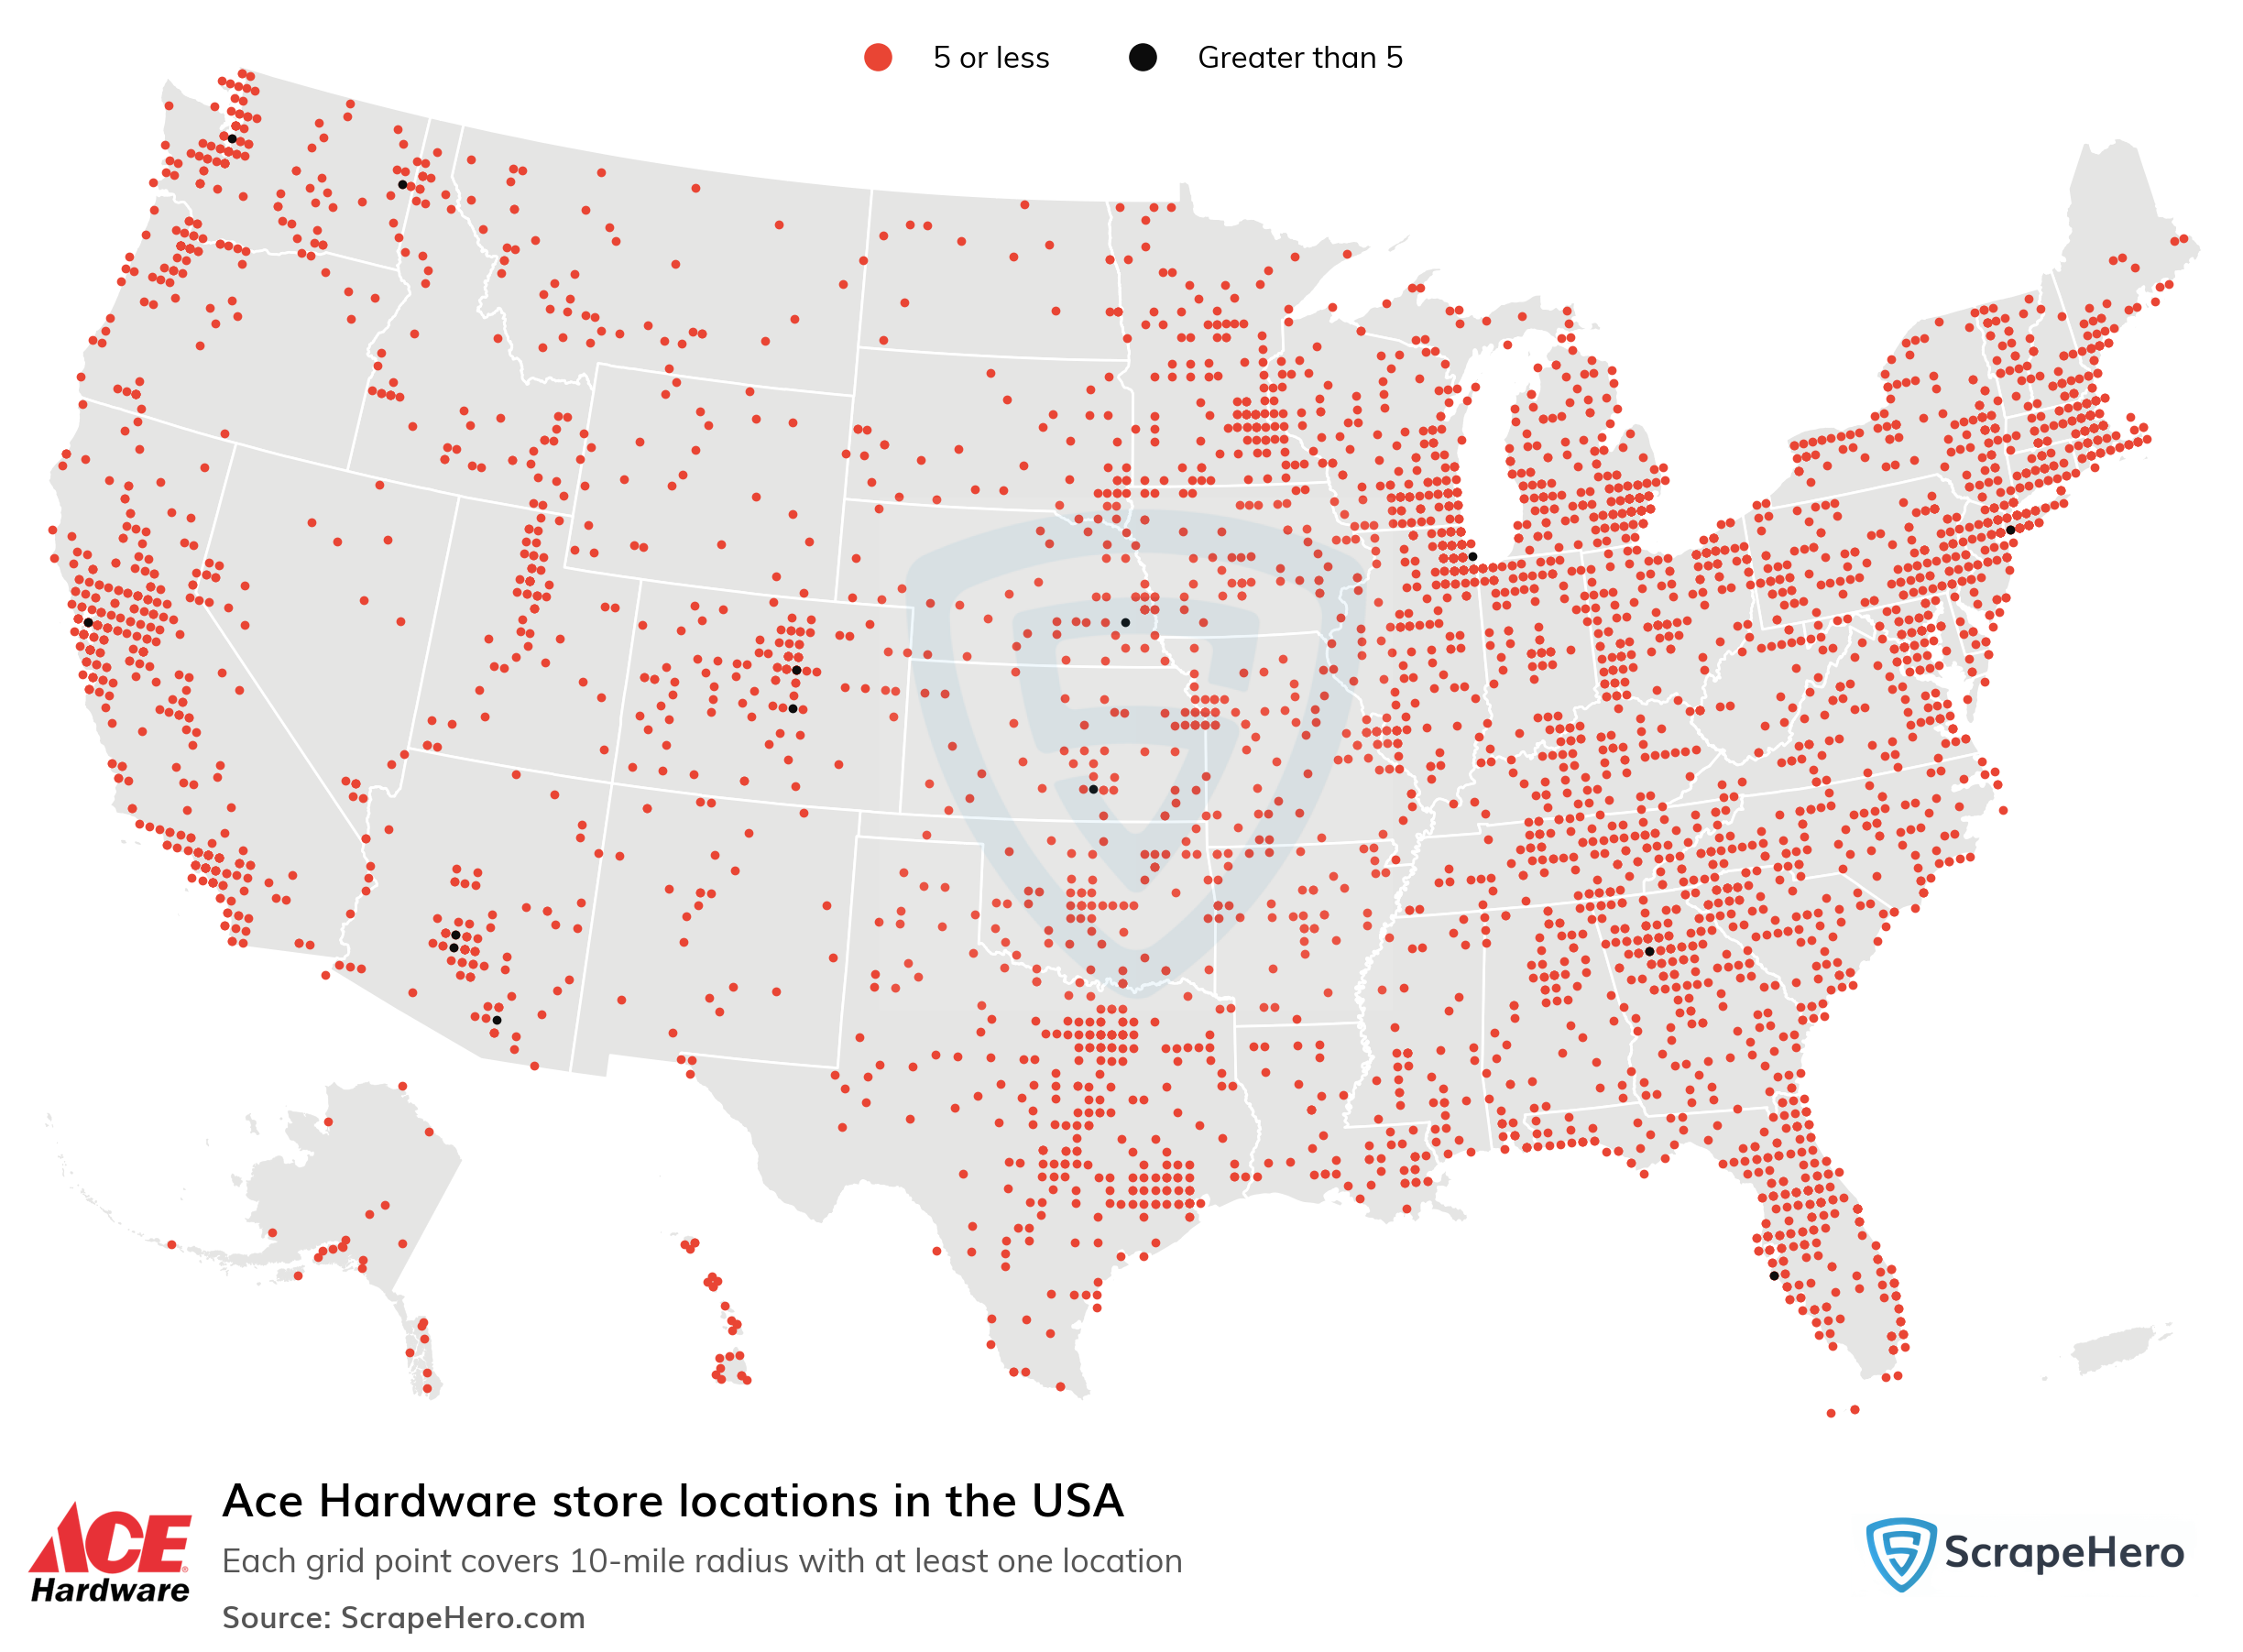 Number of Ace Hardware locations in the United States 